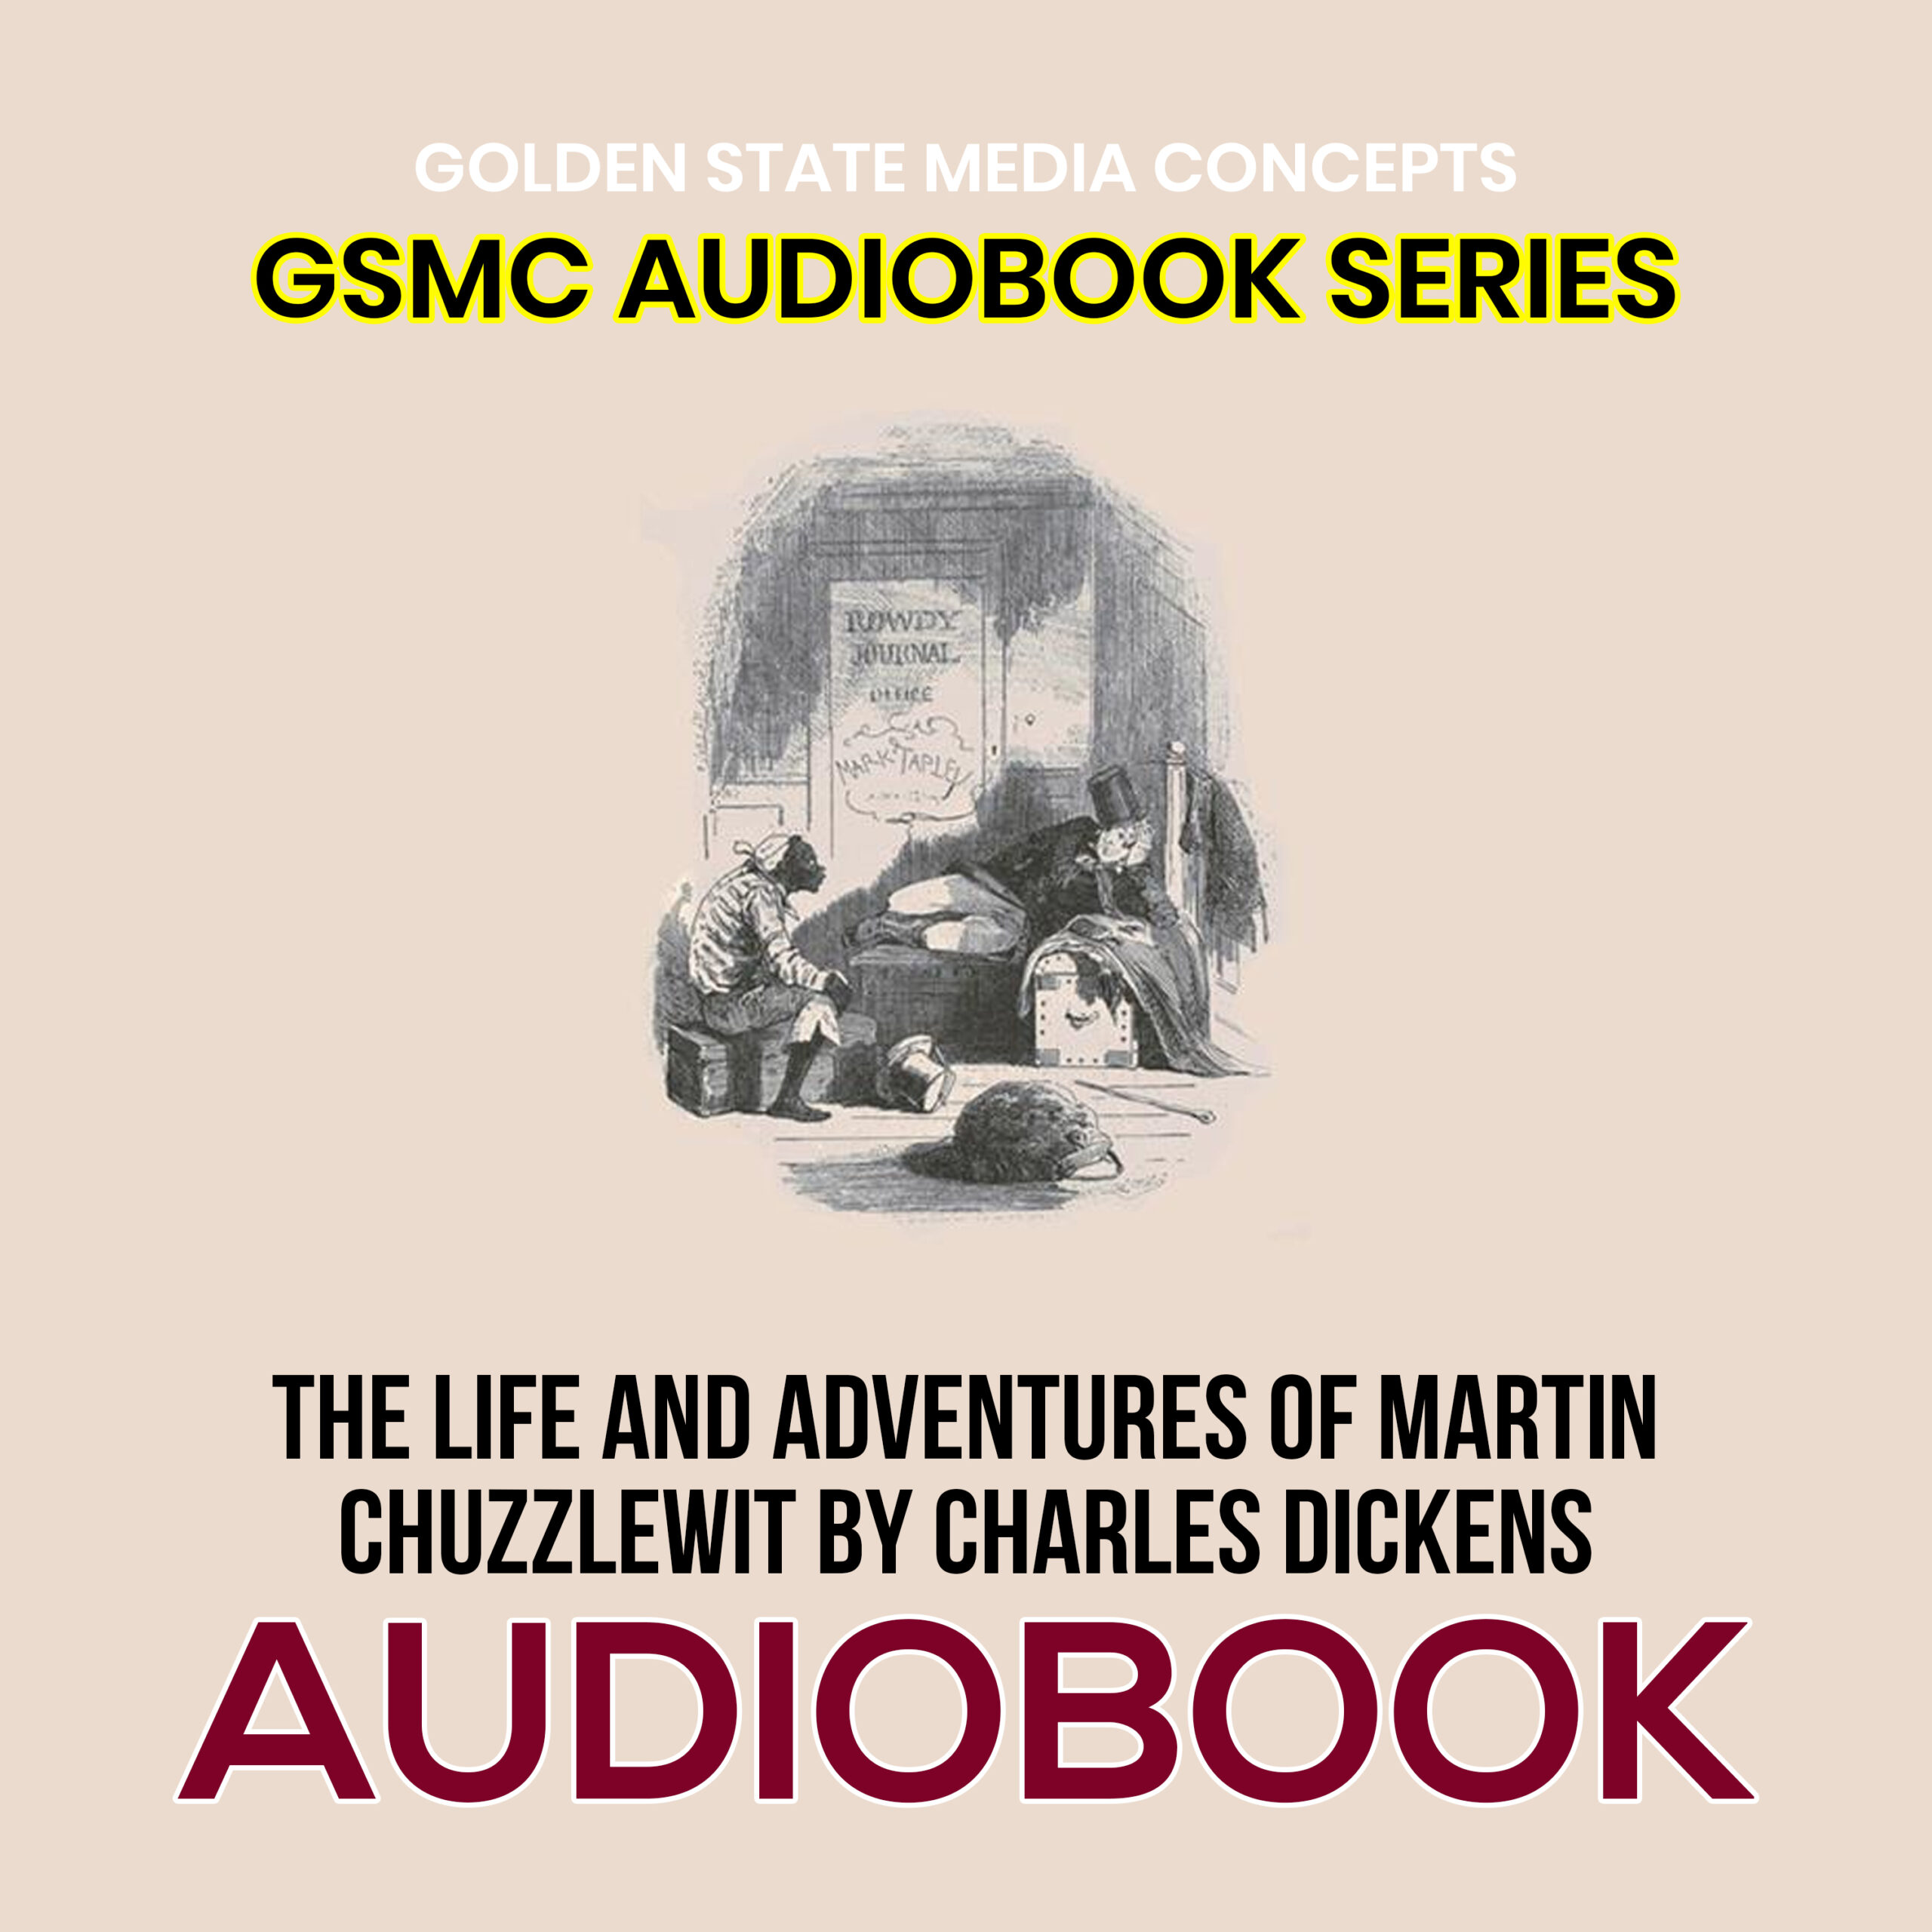 GSMC Audiobook Series: The Life and Adventures of Martin Chuzzlewit